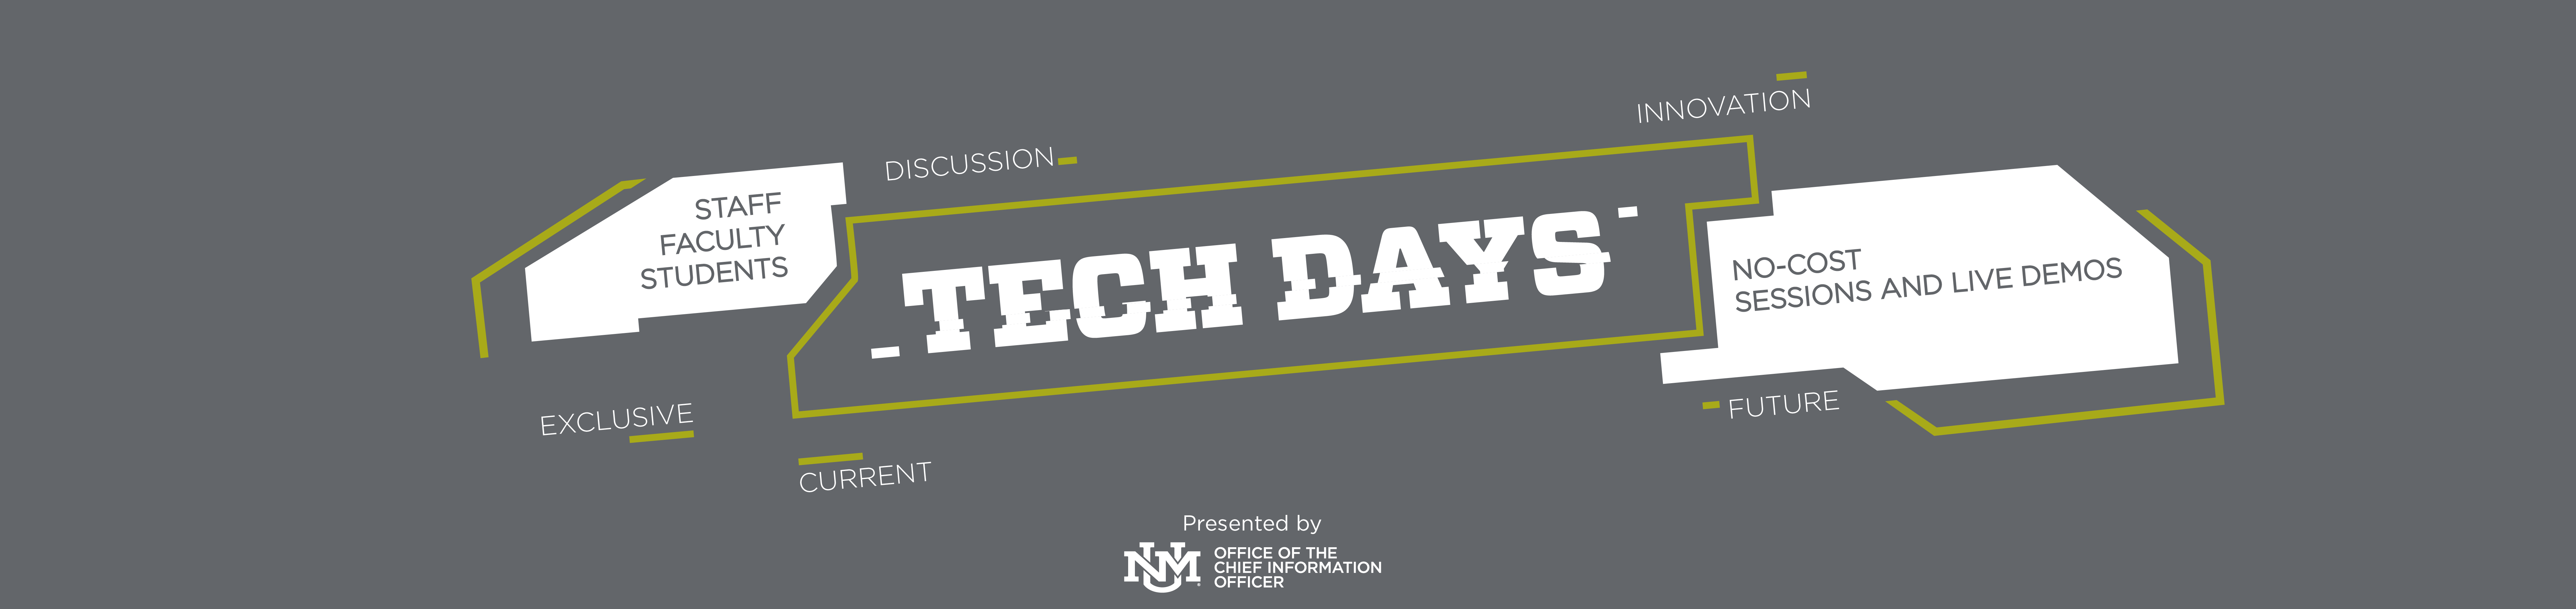 Tech days offers No cost sessions and live demos for staff, faculty, and students sponsored by the office of the CIO